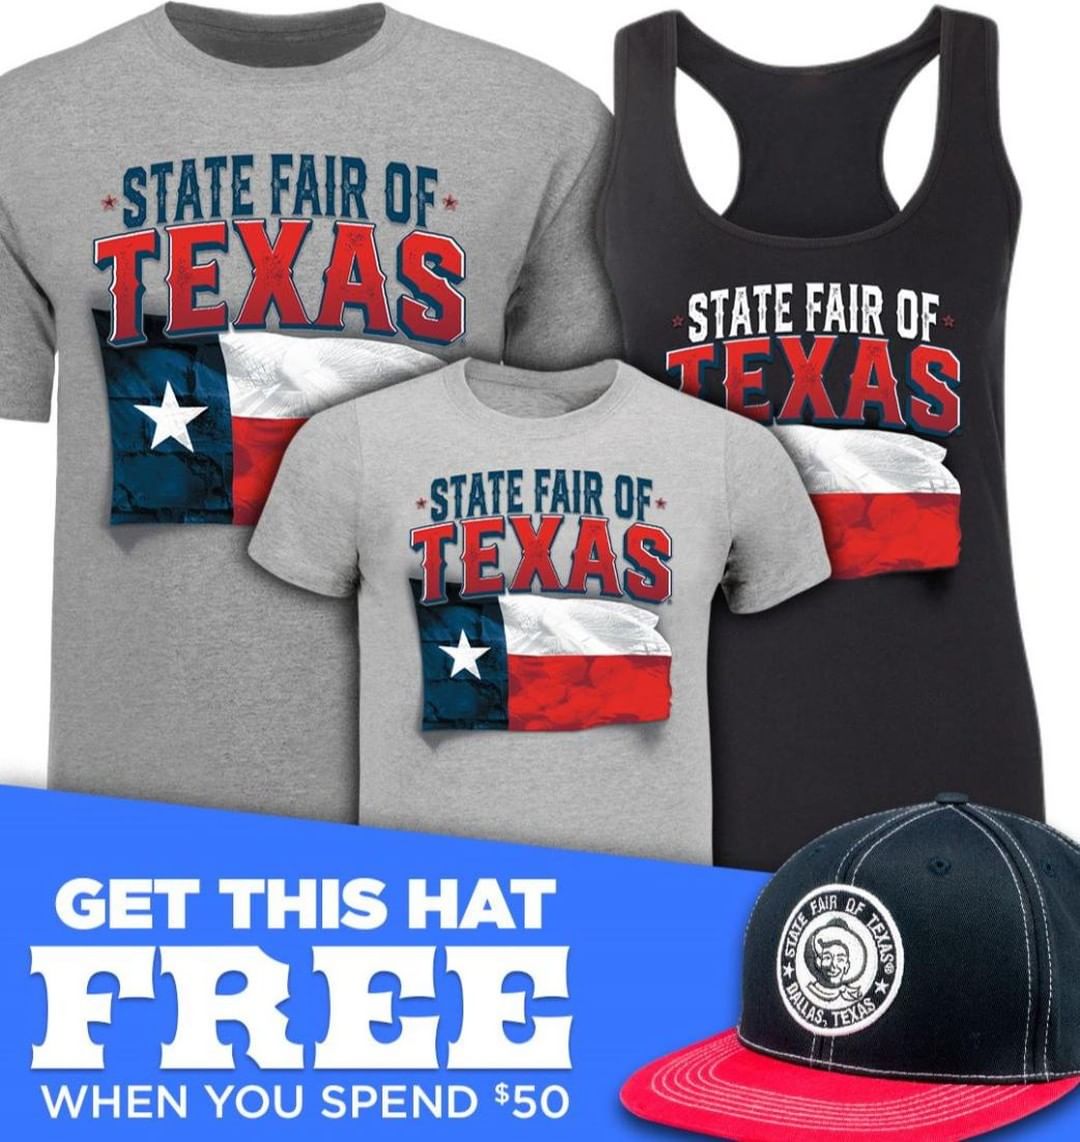 We have new PATRIOTIC gear in the all-time classic red, white, and blue! 🔴⚪🔵 Shop now to rock the new look this summer! ☀Spend $50 or more and get a FREE Snapback #BigTex Hat! Head online to start shopping!! bigtexstore.com #StateFairofTX #Summer #Texas